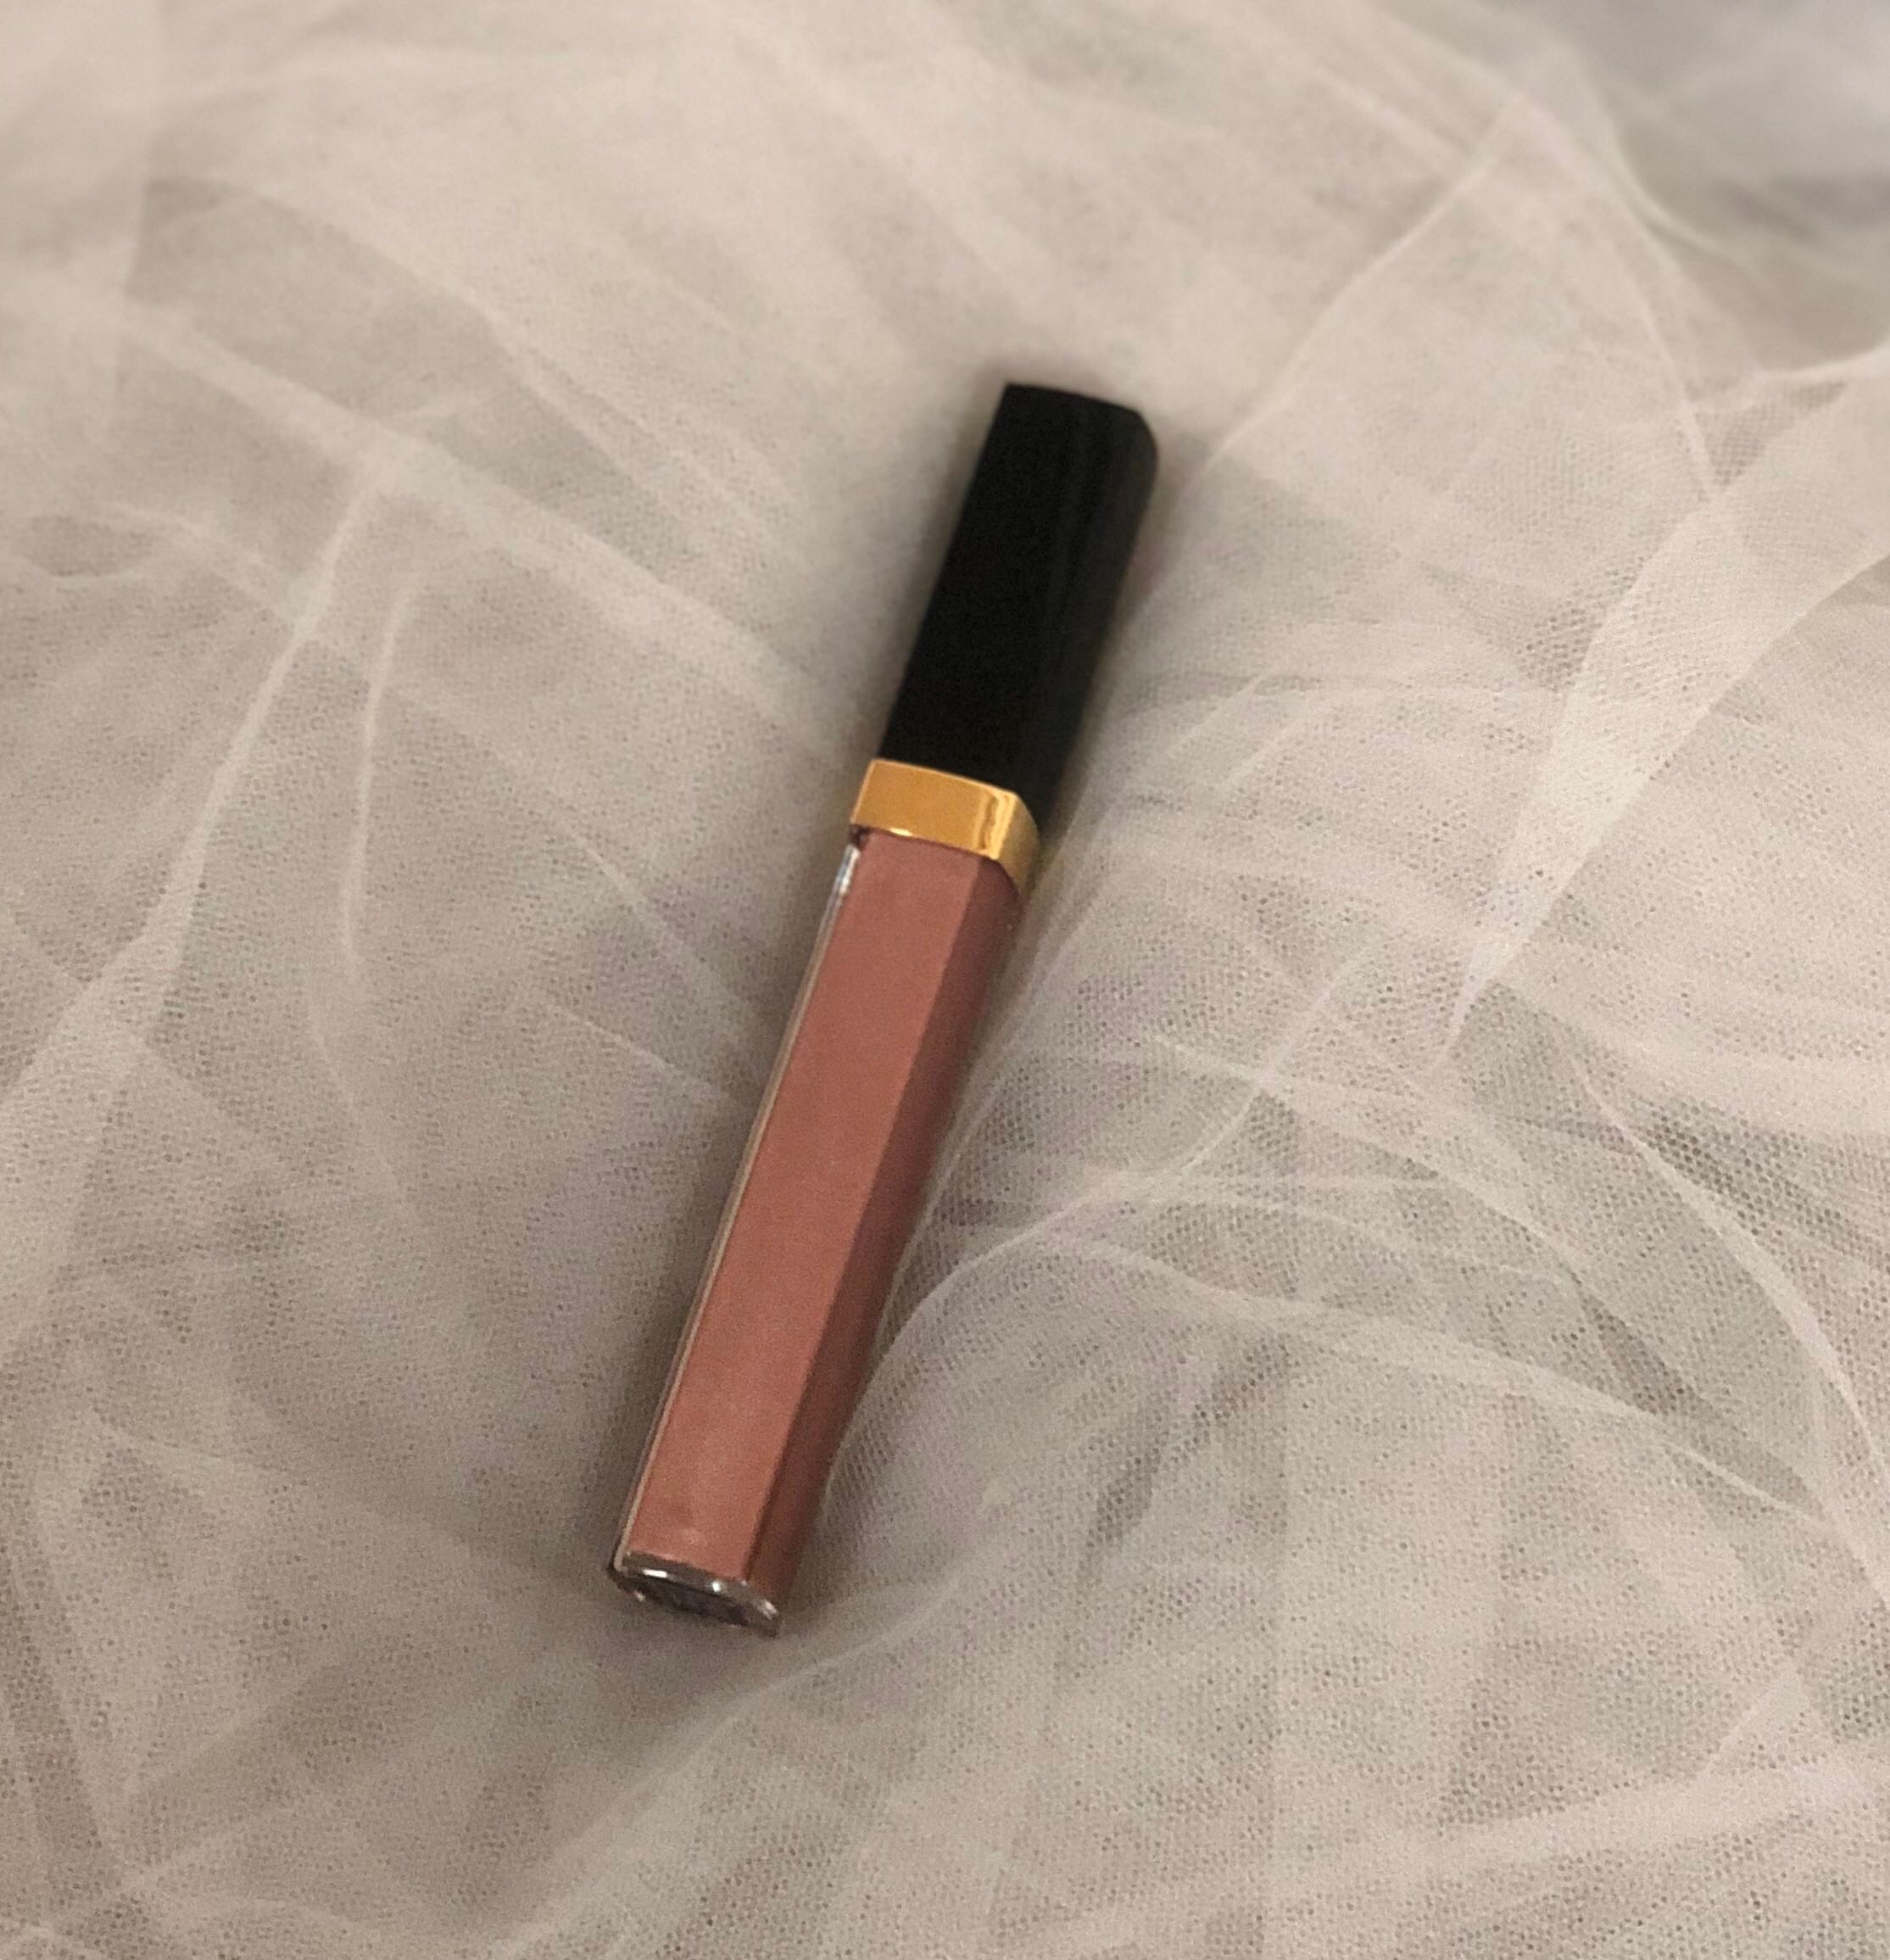 CHANEL, Makeup, Chanel Rouge Coco Lip Gloss In 722 Noce Moscata